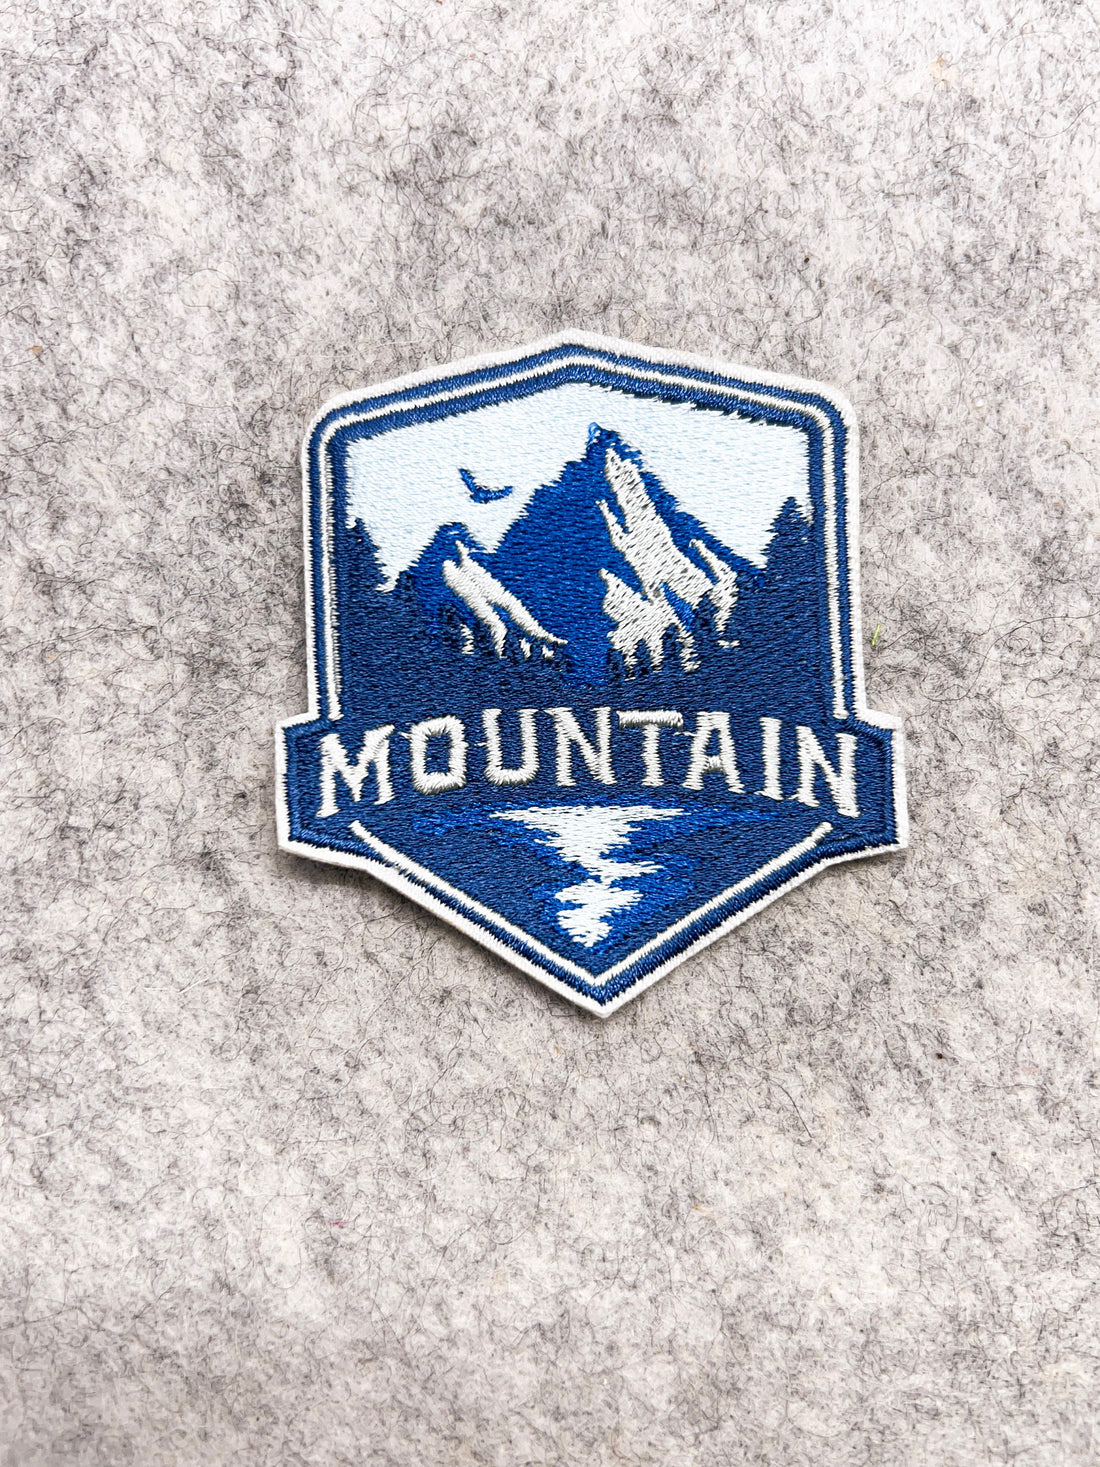 Embroidered Blue Mountain Patch